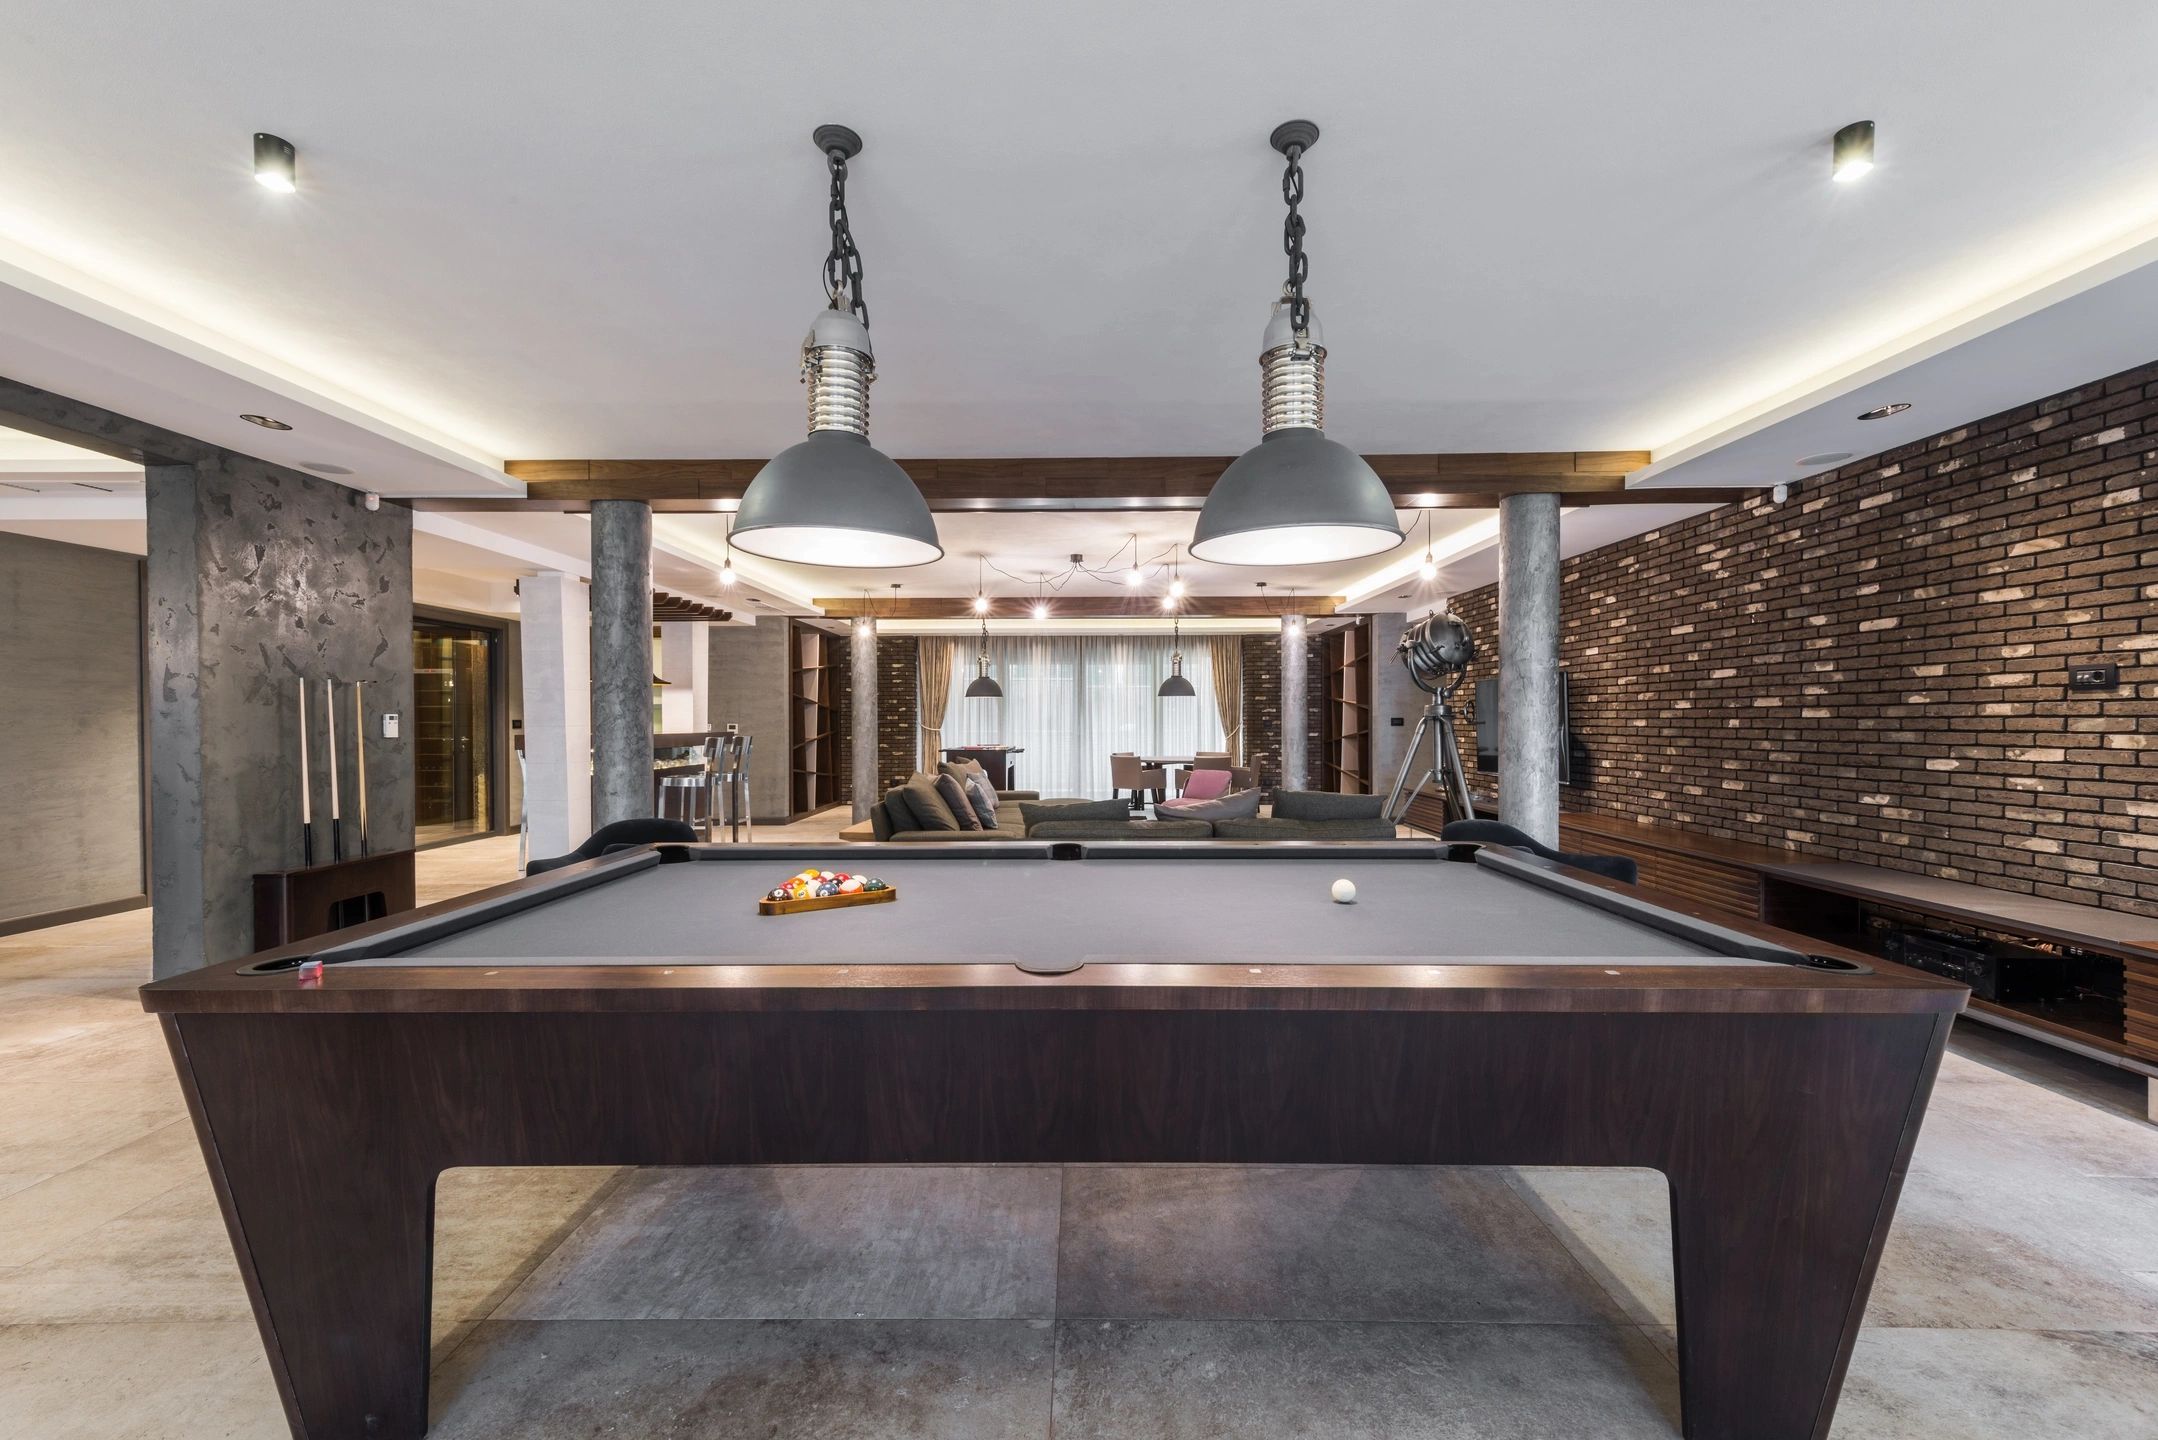 Finished basement with pool table and lights